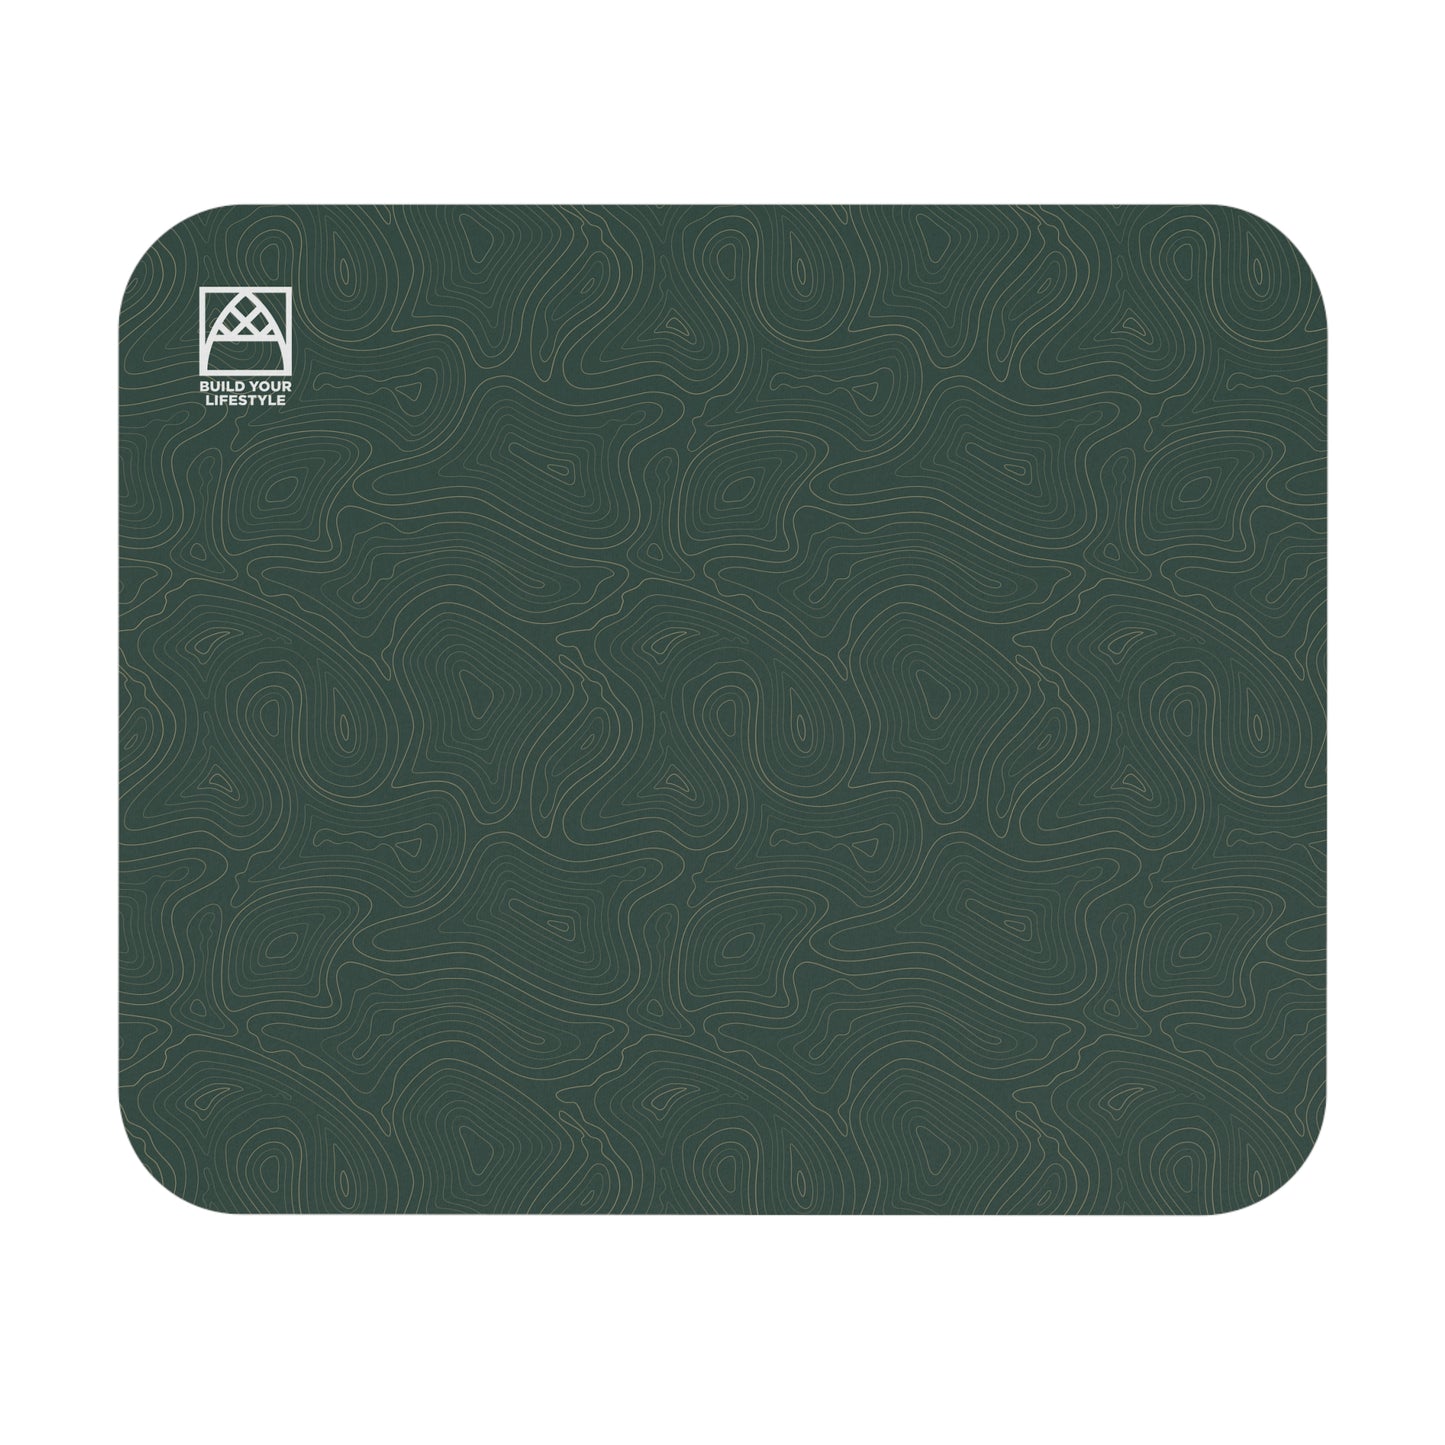 Arched Cabins LLC "Build Your Lifestyle" Topographic Mouse Pad (Rectangle)